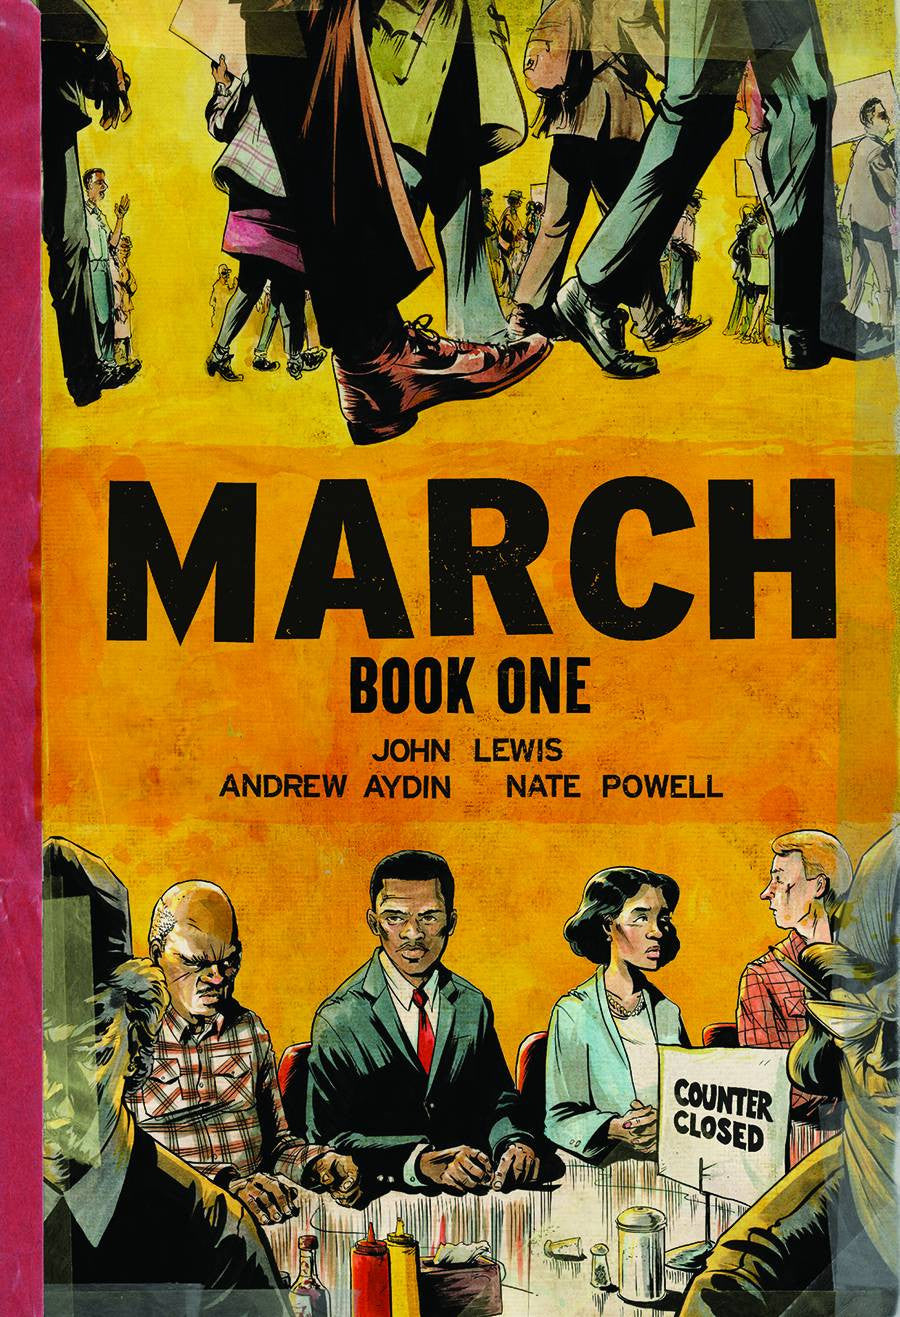 MARCH GN BOOK 01 COVER